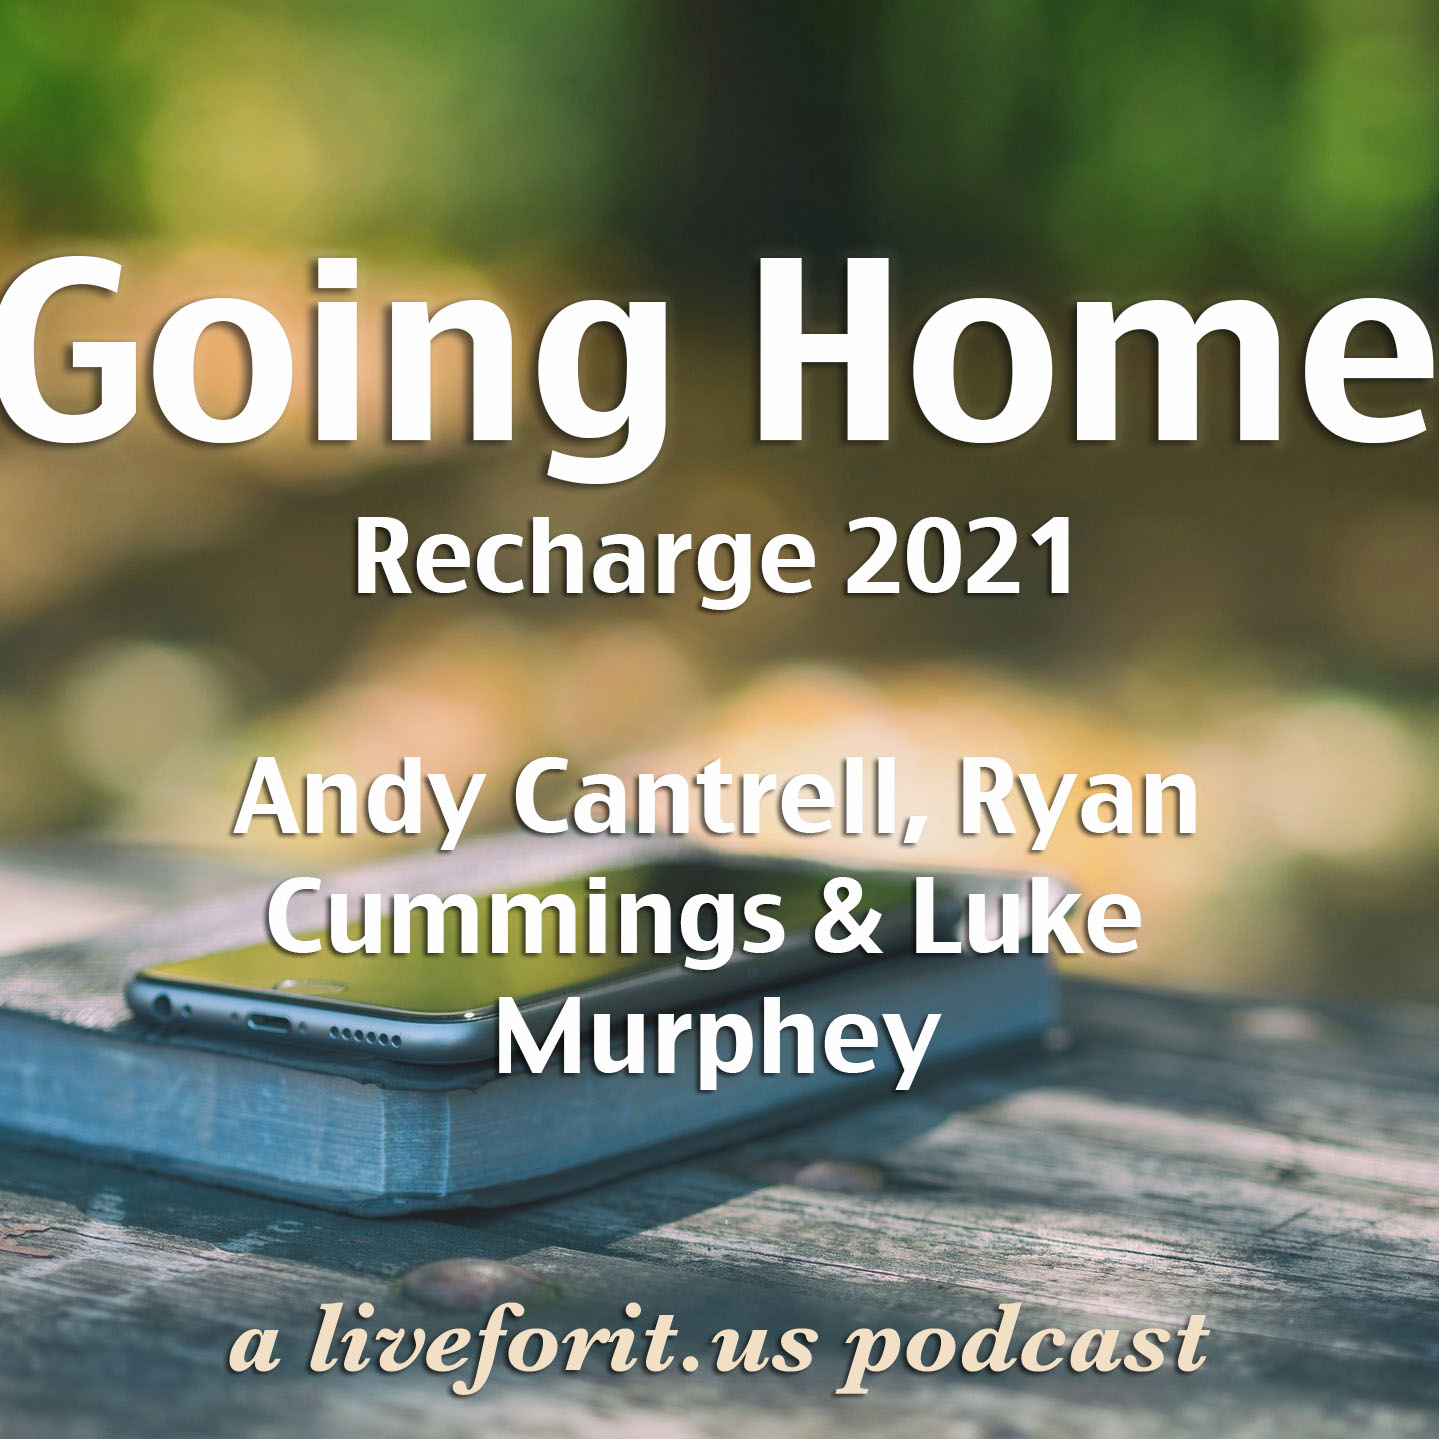 When I Go Home – Recharge 2021